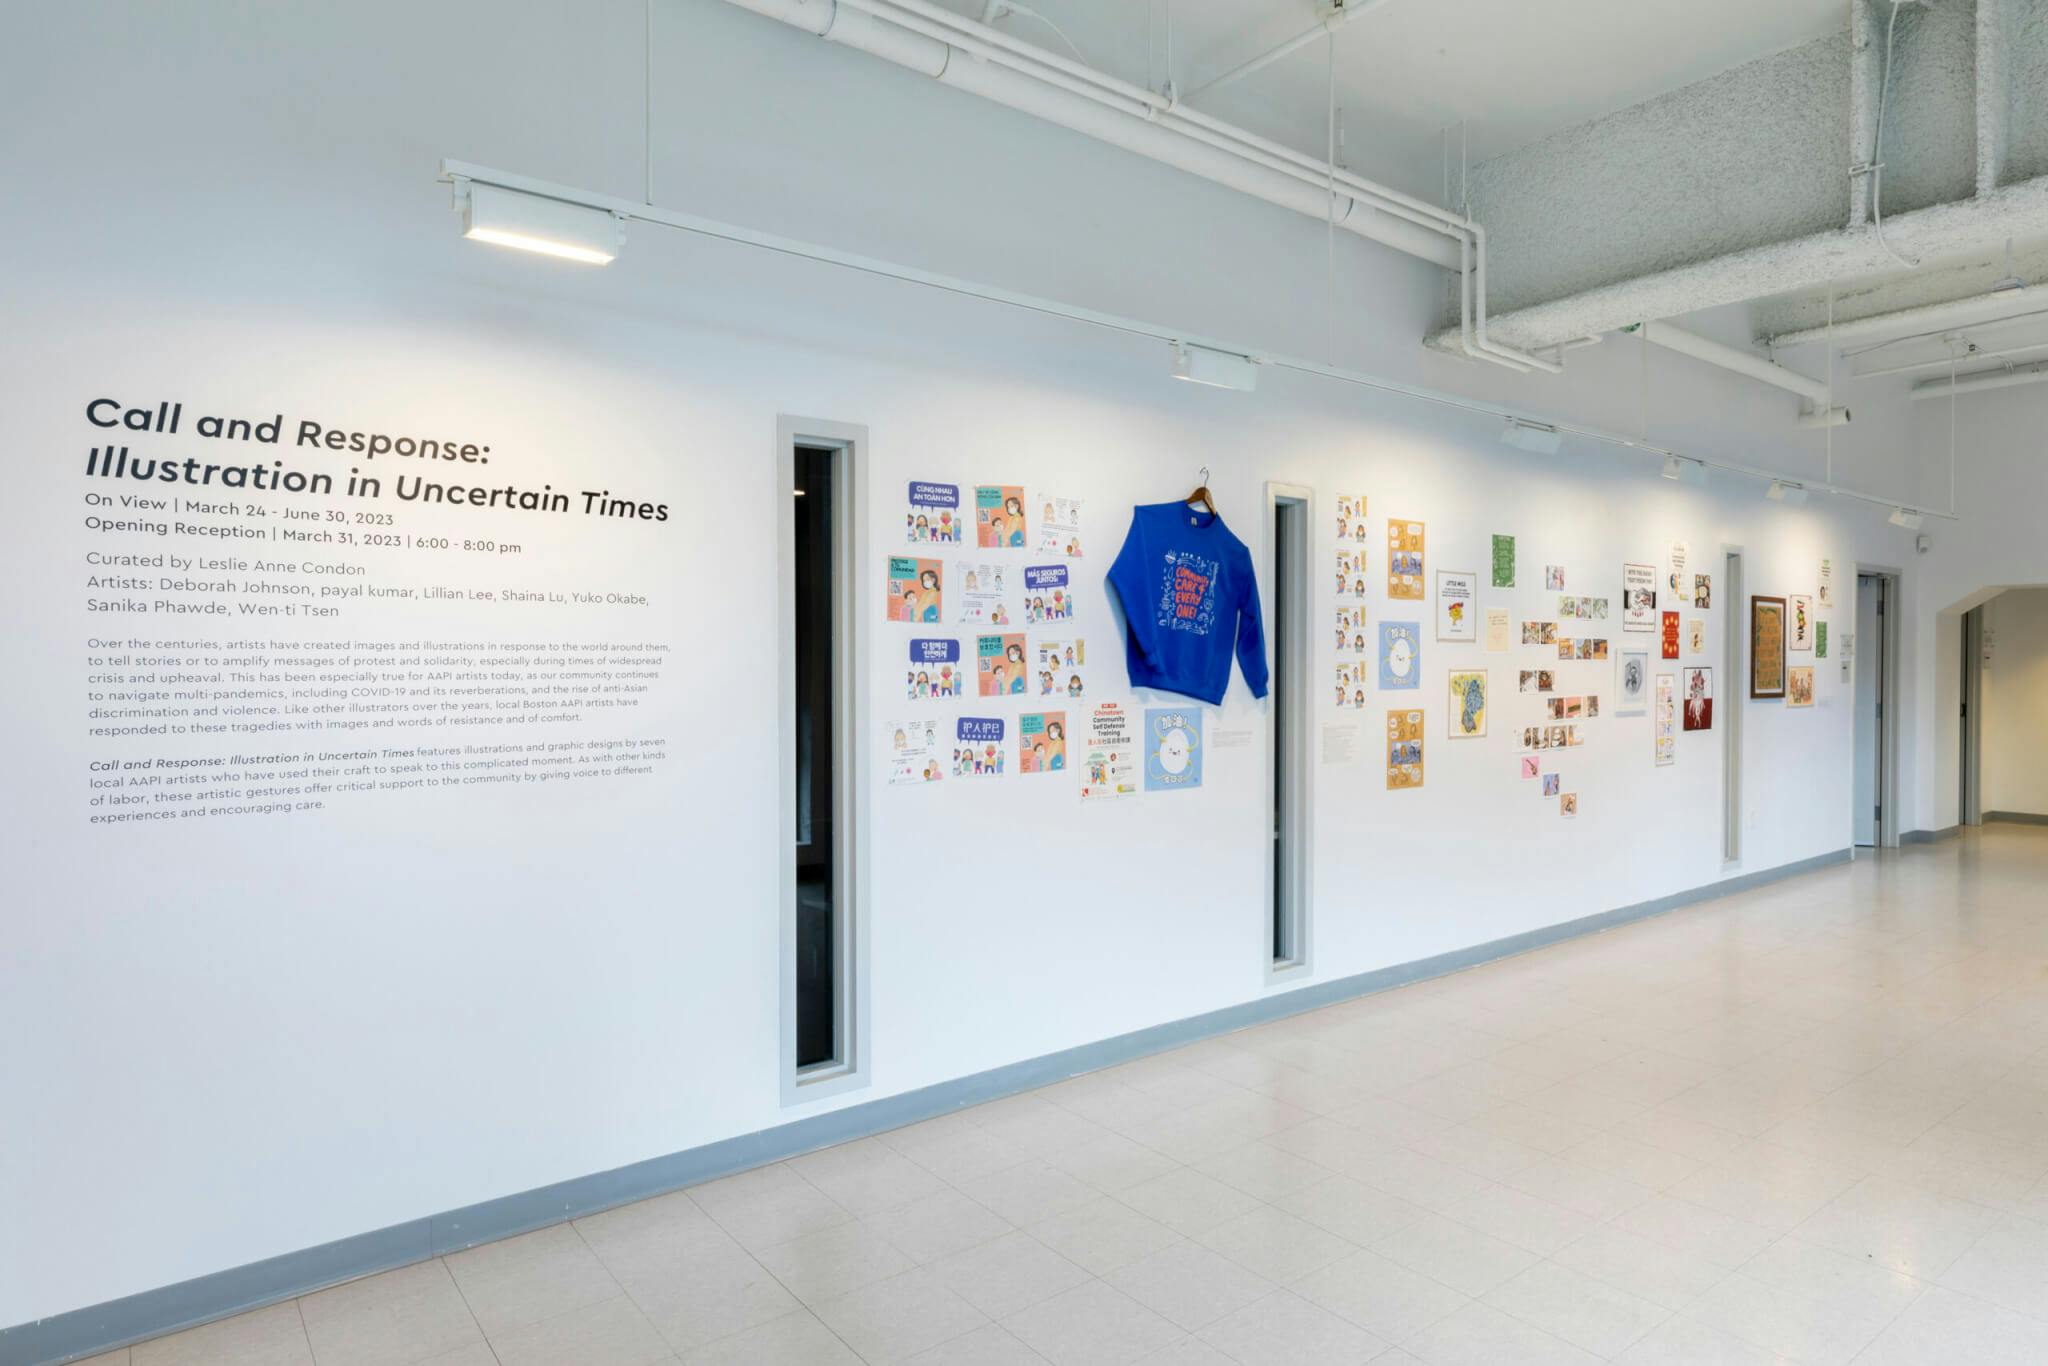 A bright blue sweatshirt hangs against a white wall at Pao Arts Center, beside other assorted images.